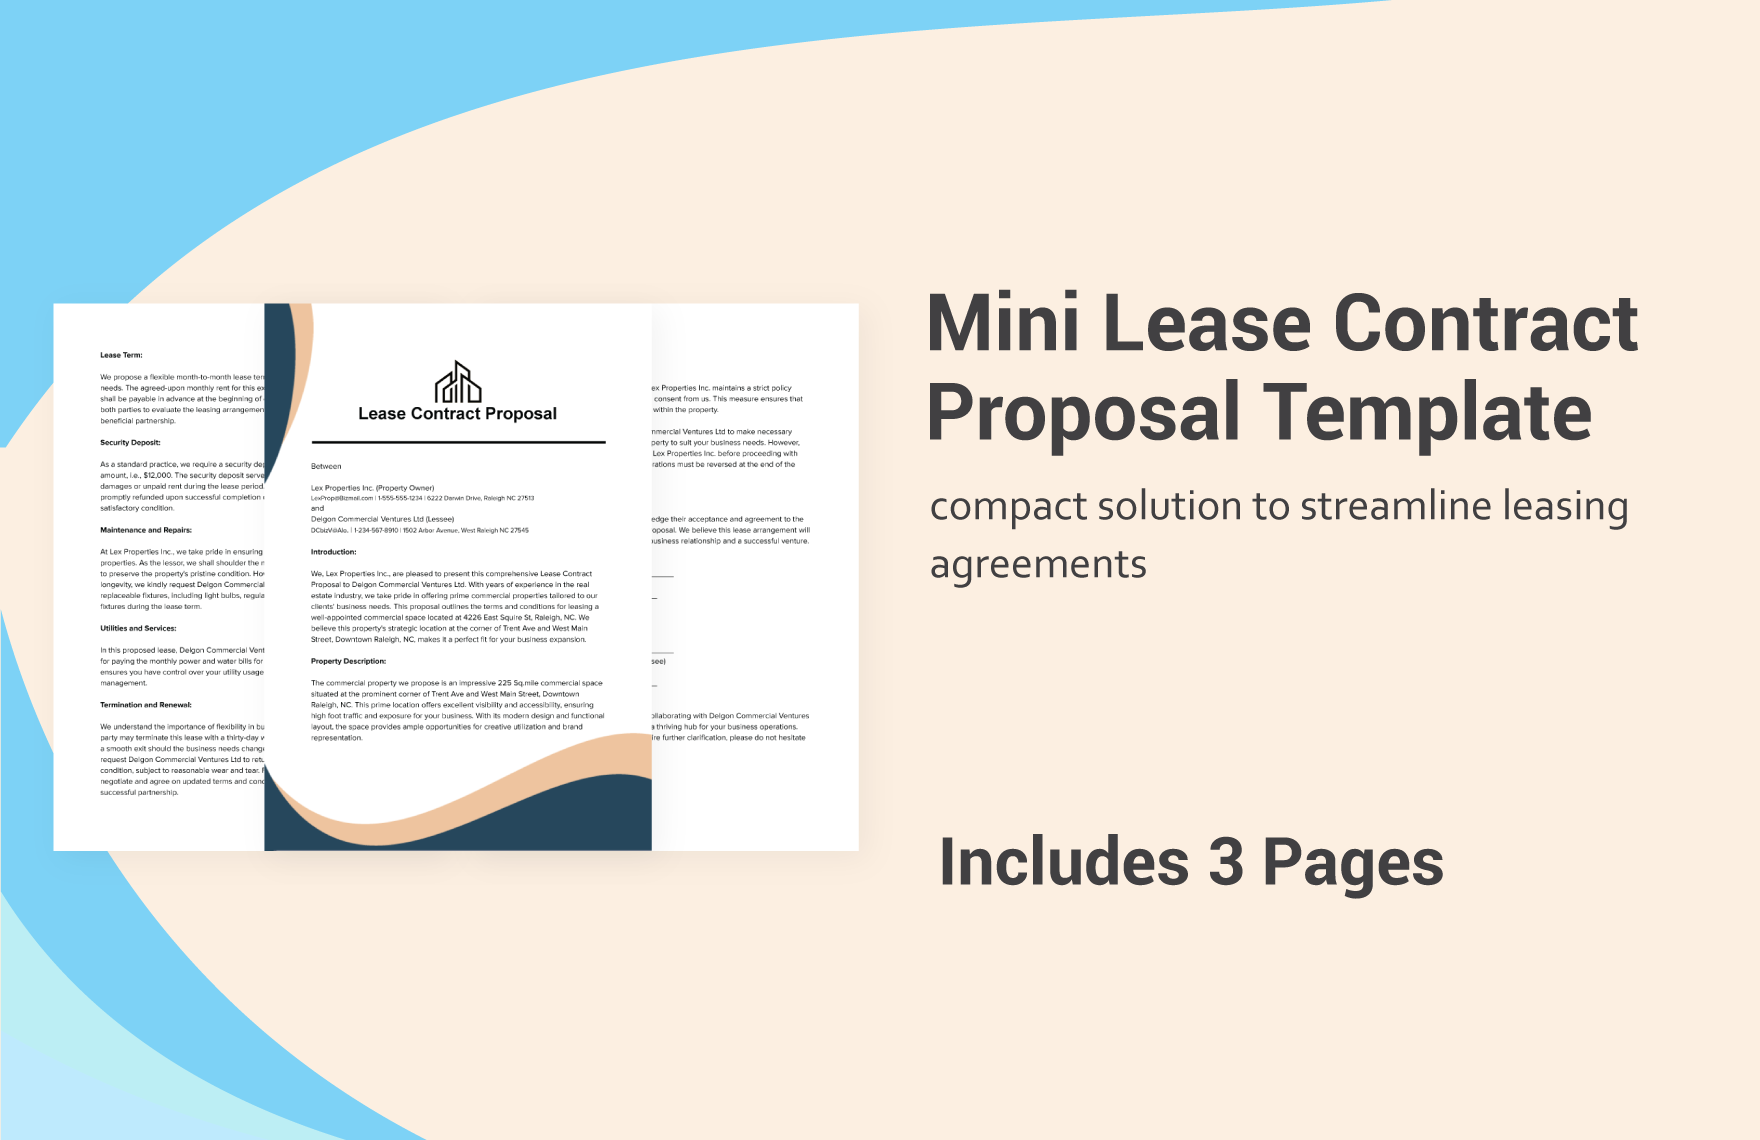 Mini Lease Contract Proposal Template